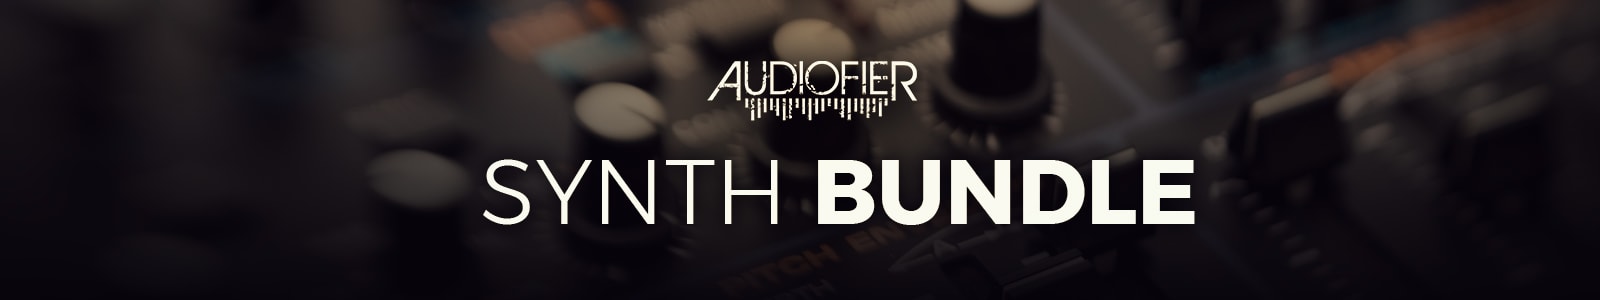 audiofier synth bundle